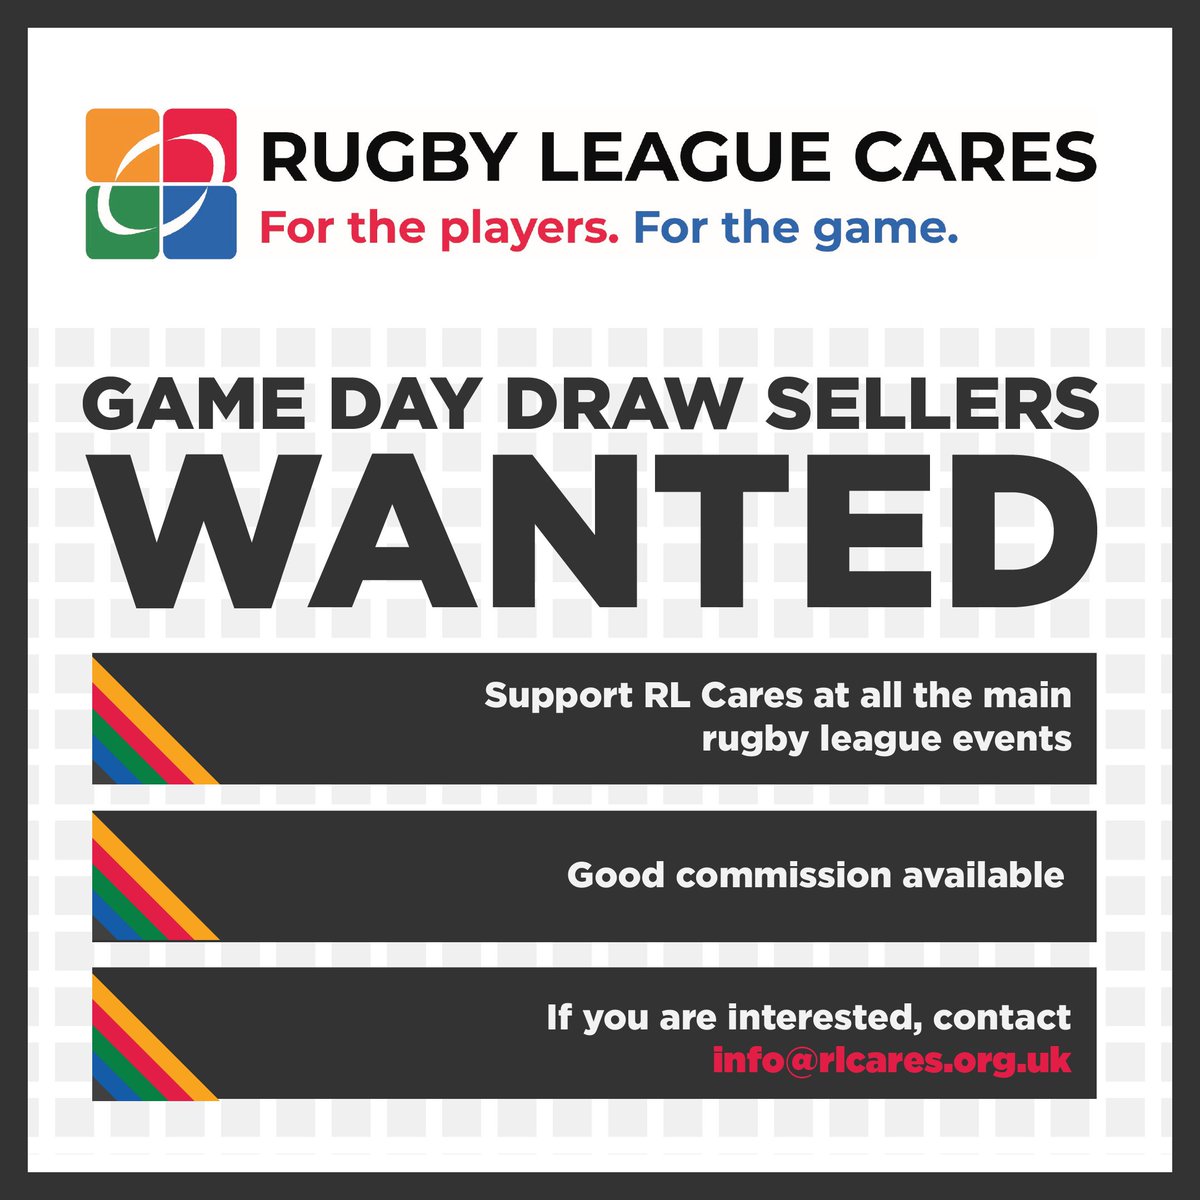 We're looking for people to help us raise the funds we need to do our amazing work across #rugbyleague communities - and offering the chance to earn some commission at the same time! If you think you can help, please get in touch - info@rlcares.org.uk